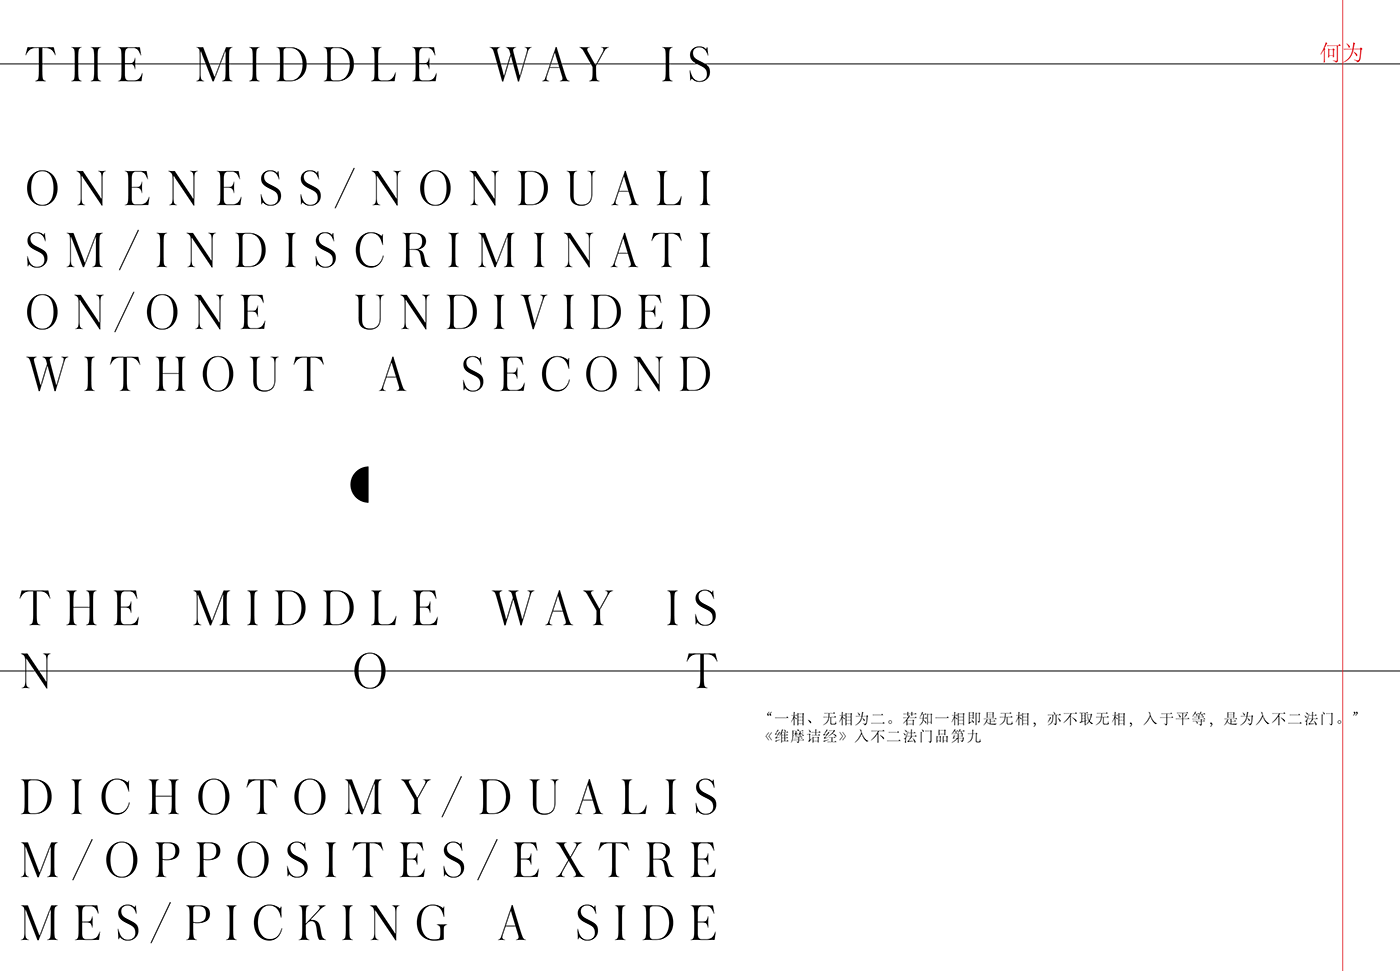 the middle way type design Exhibition  thesis graphic design  duality buddhism philosophy  inner peace adobeawards